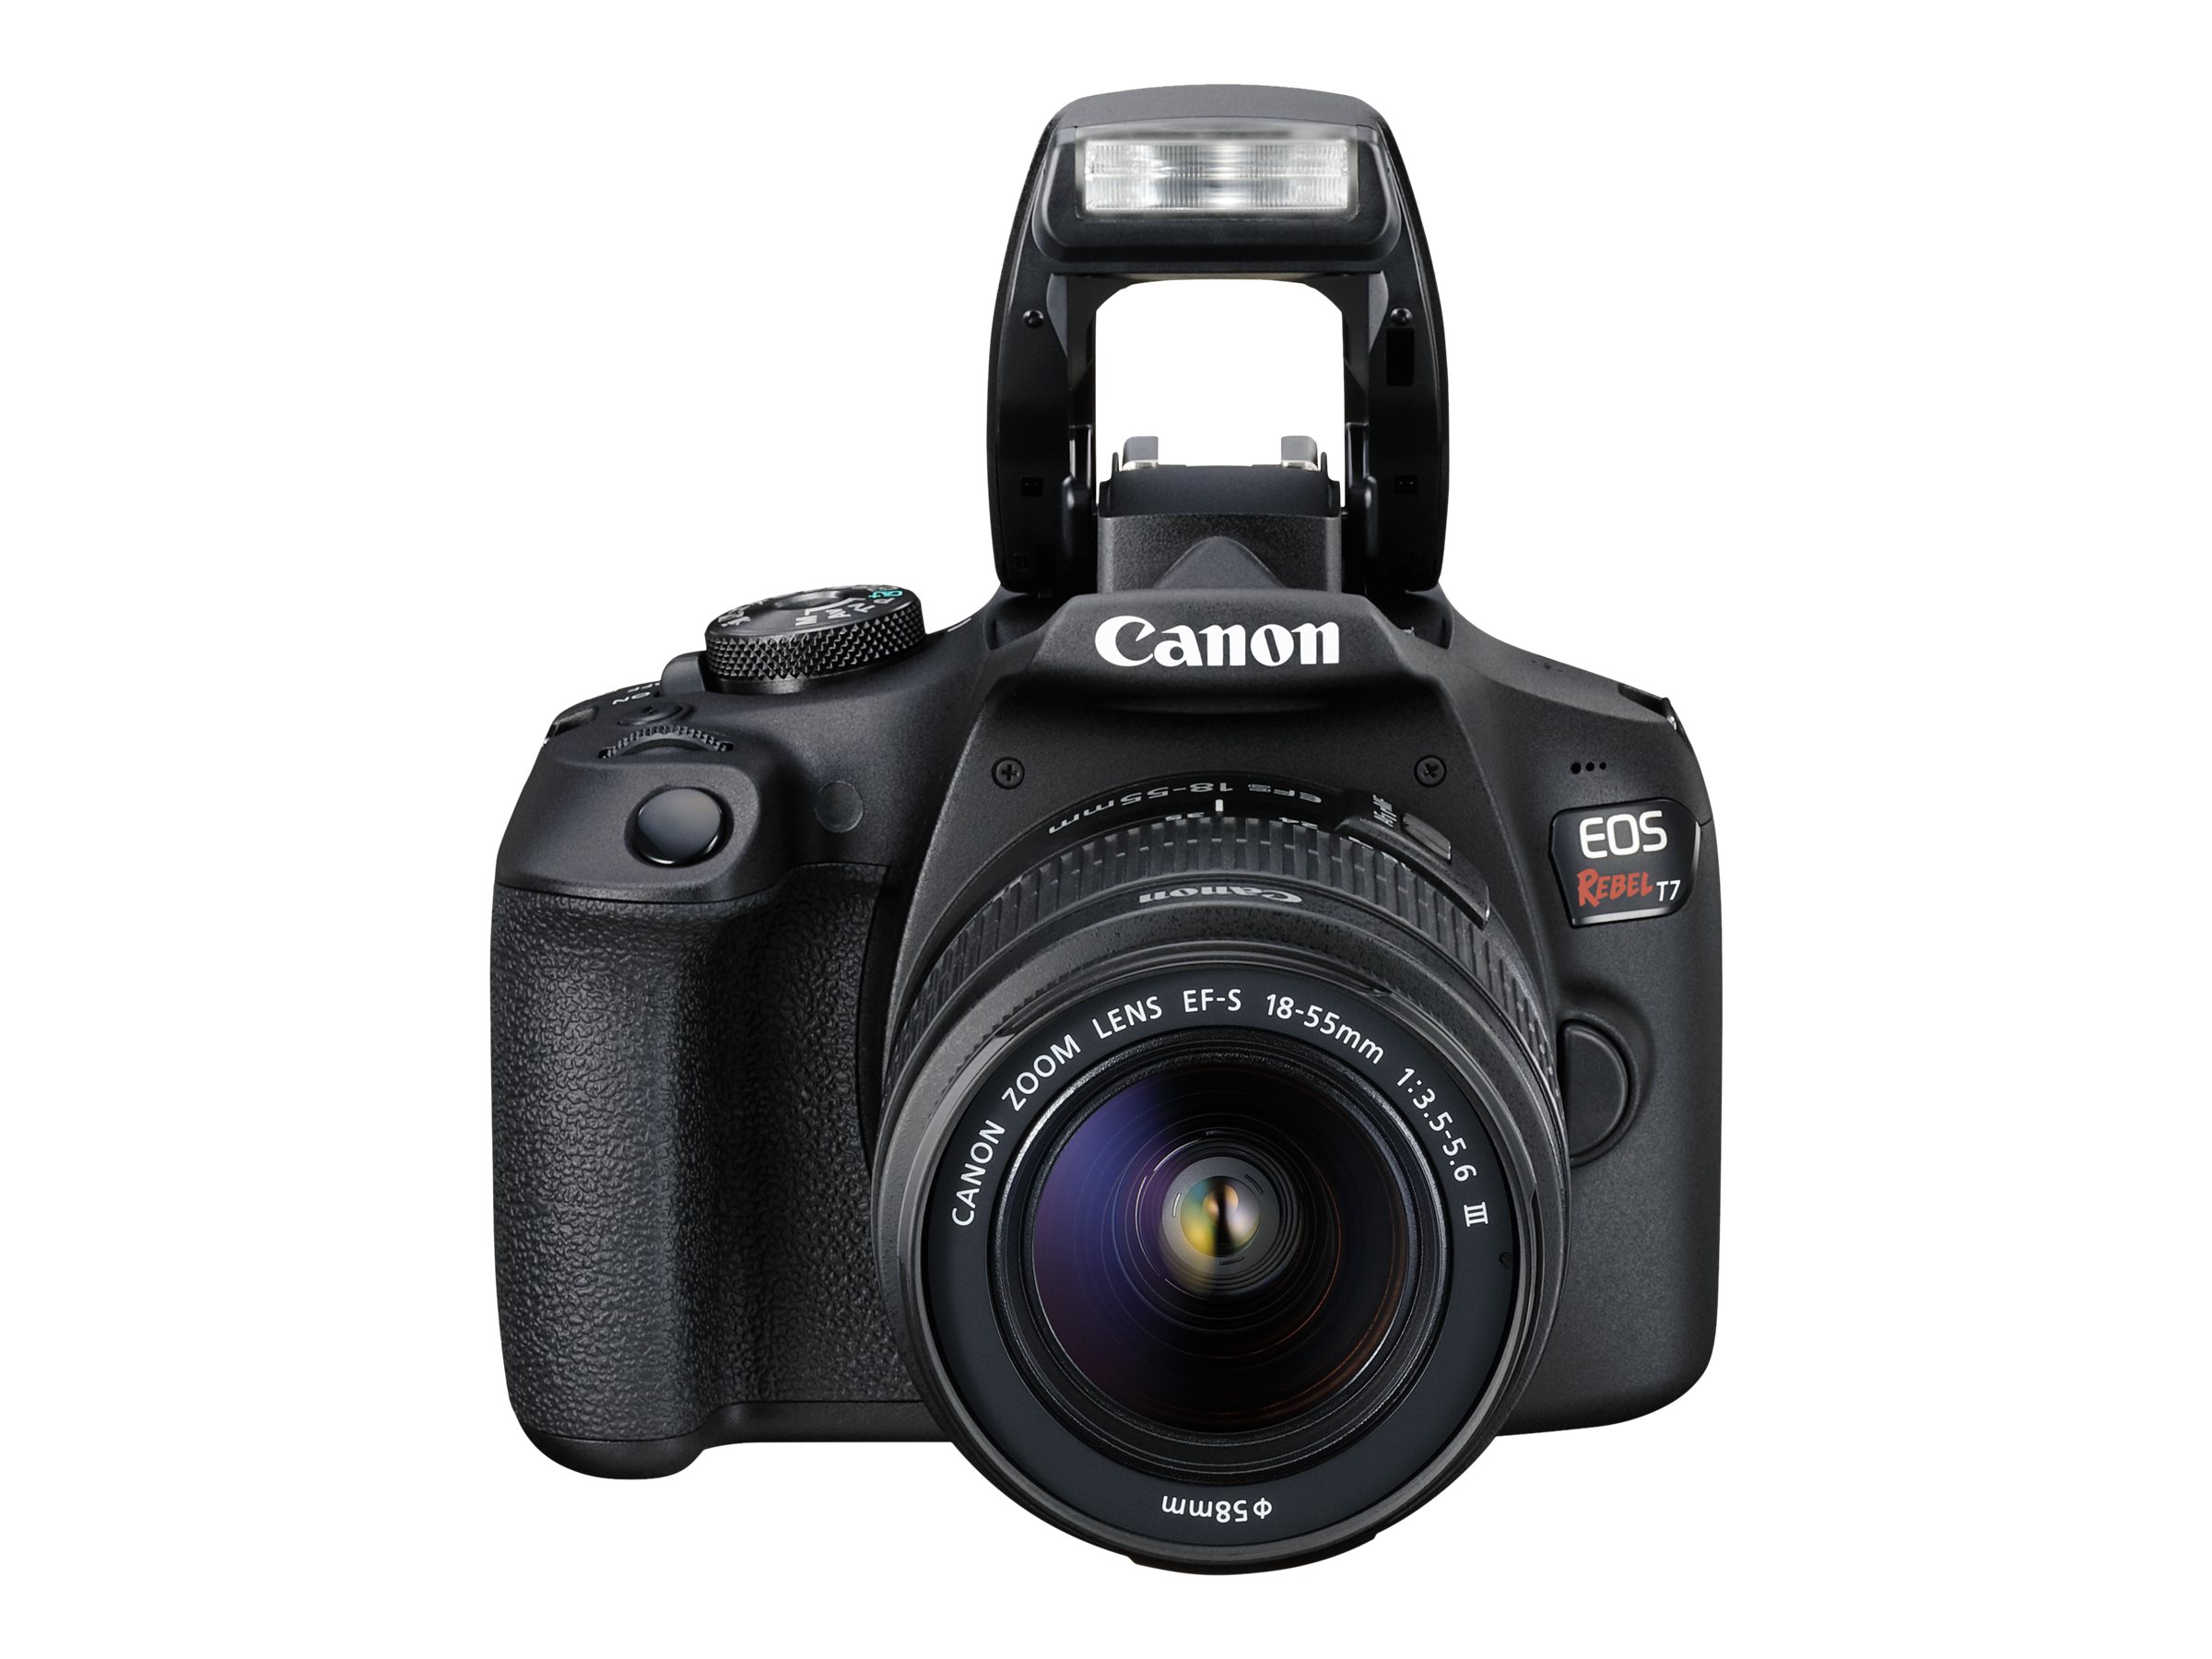 Canon EOS Rebel T7 DSLR Video Camera with 18-55mm Lens Black